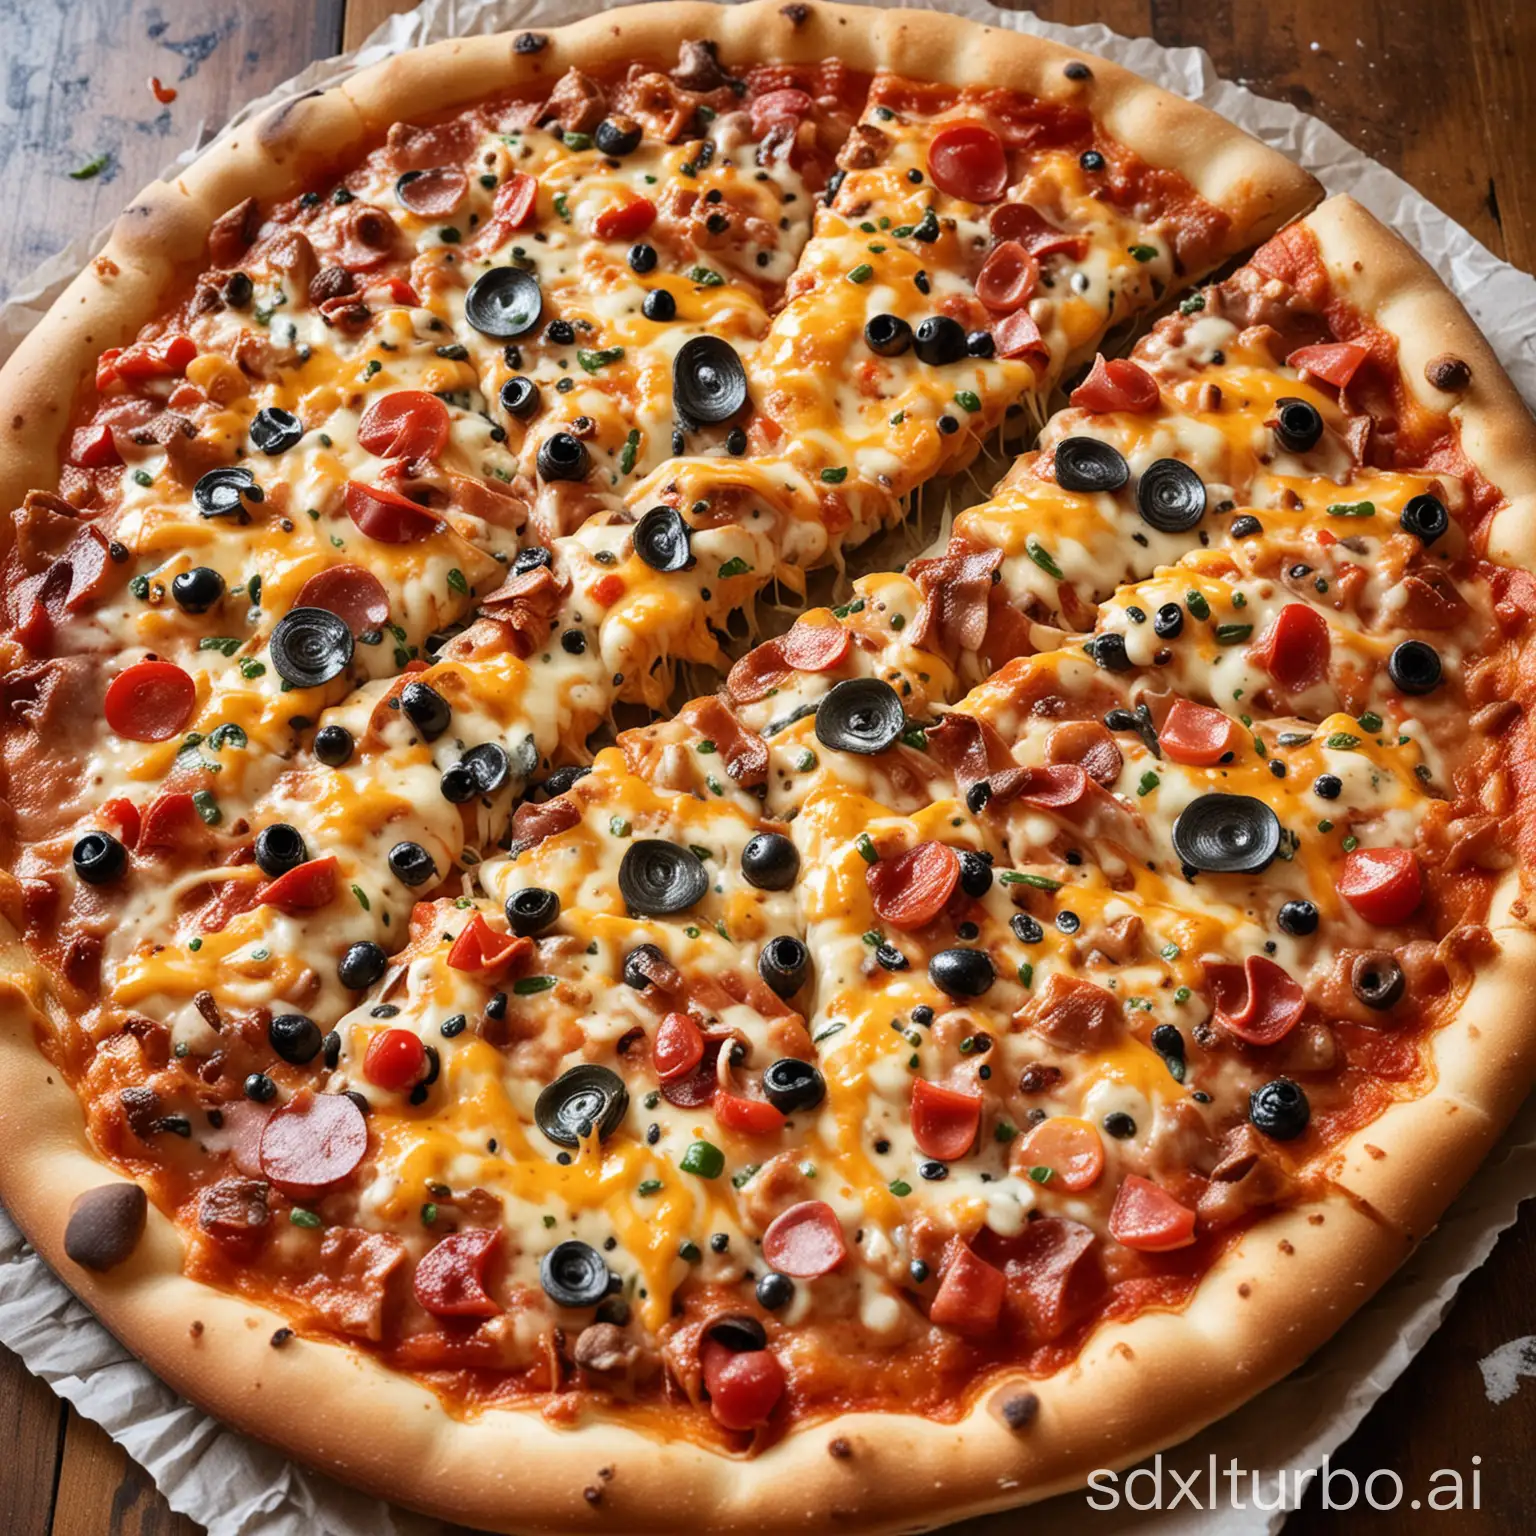 A close-up image of a freshly baked pizza. The pizza is covered in melted cheese and colorful toppings. The crust is golden brown and crispy.